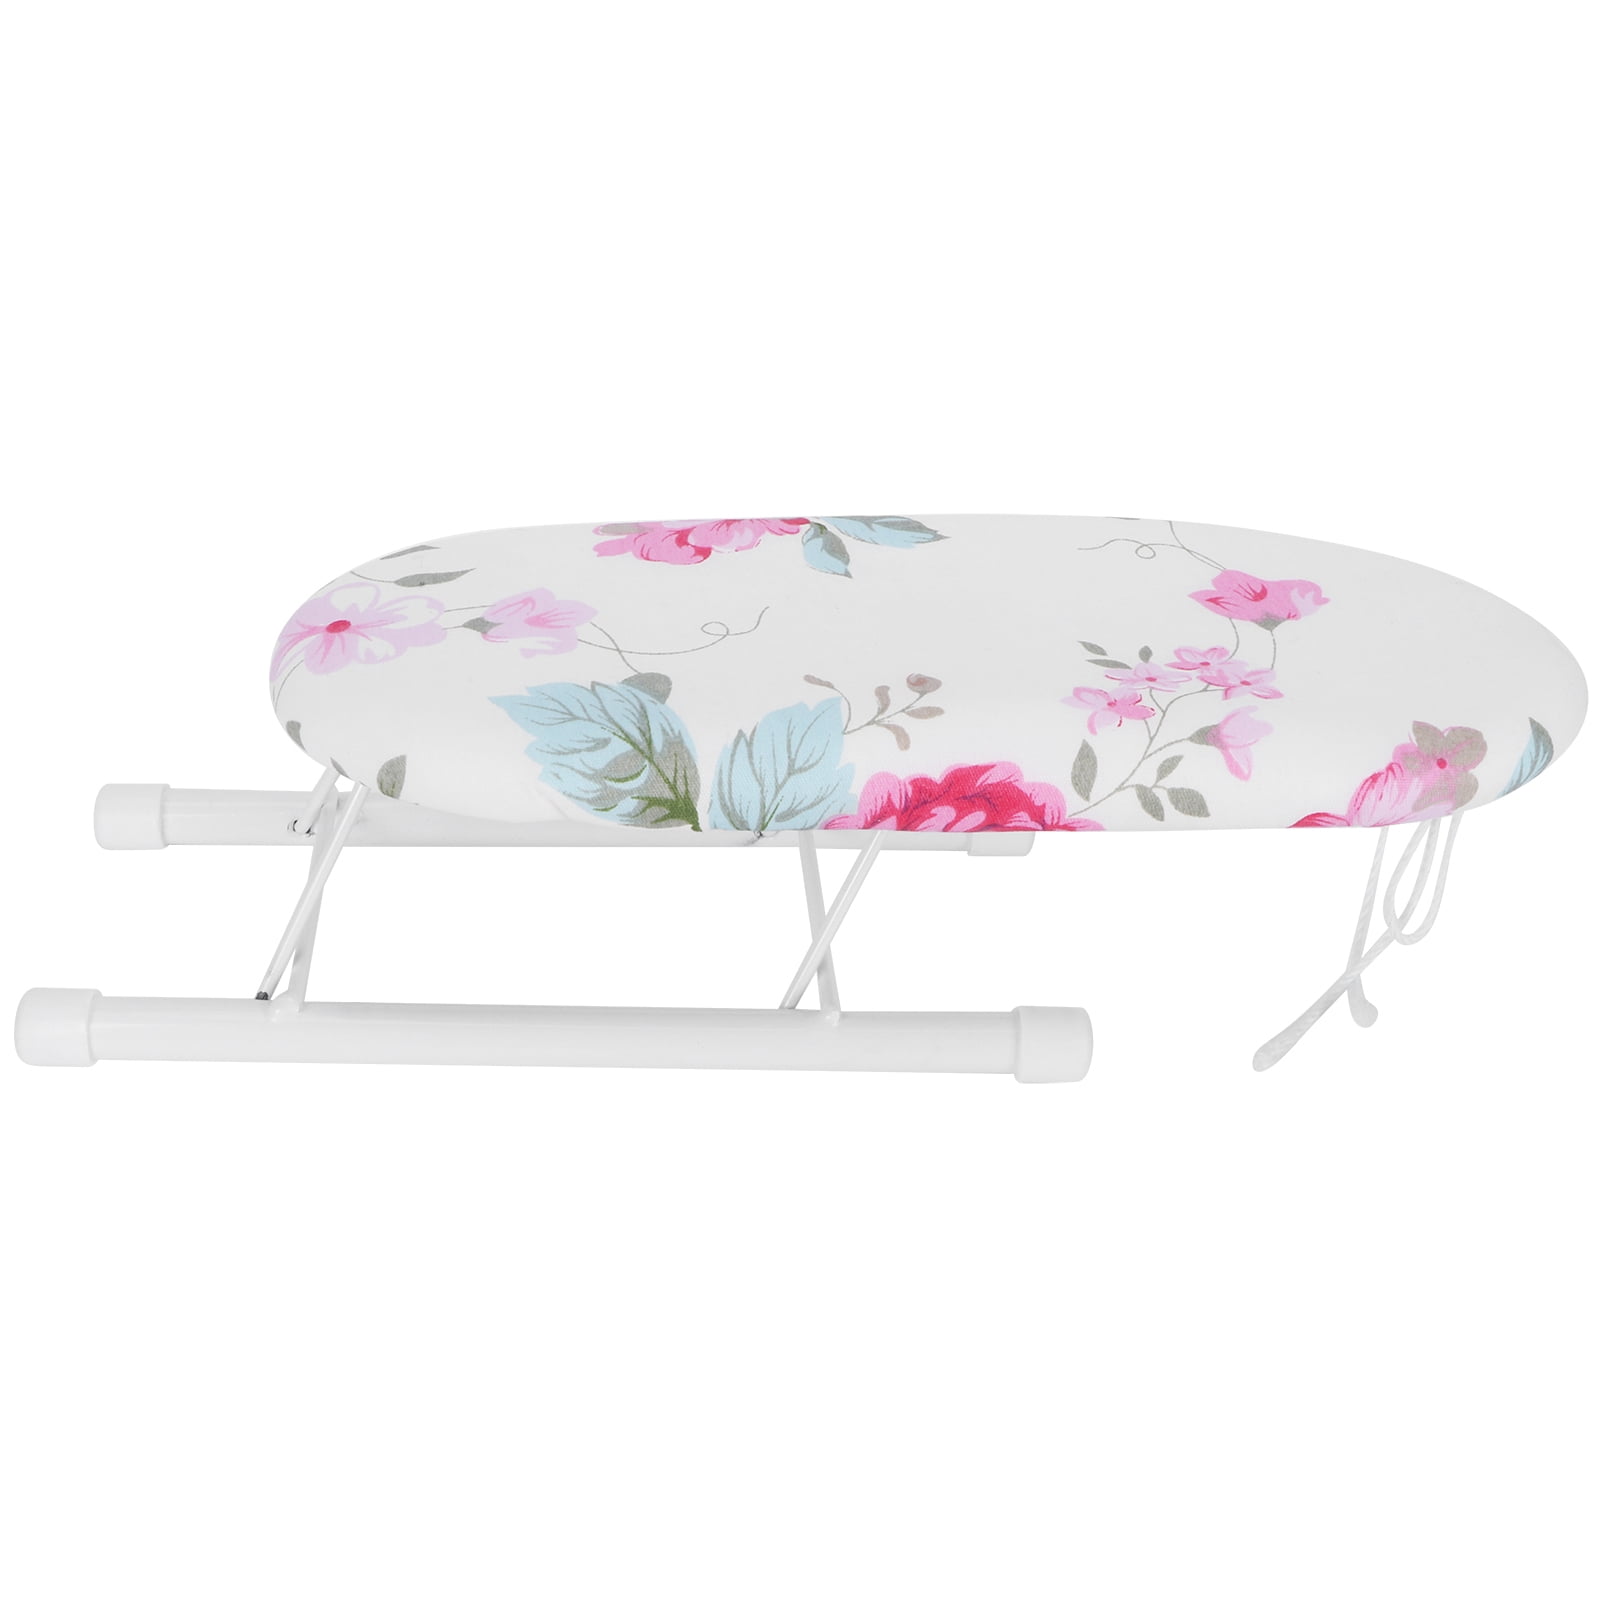 Ironing Table Durable Folding Ironing Board Anti-scalding Silver Cloth Smooth Thickened 